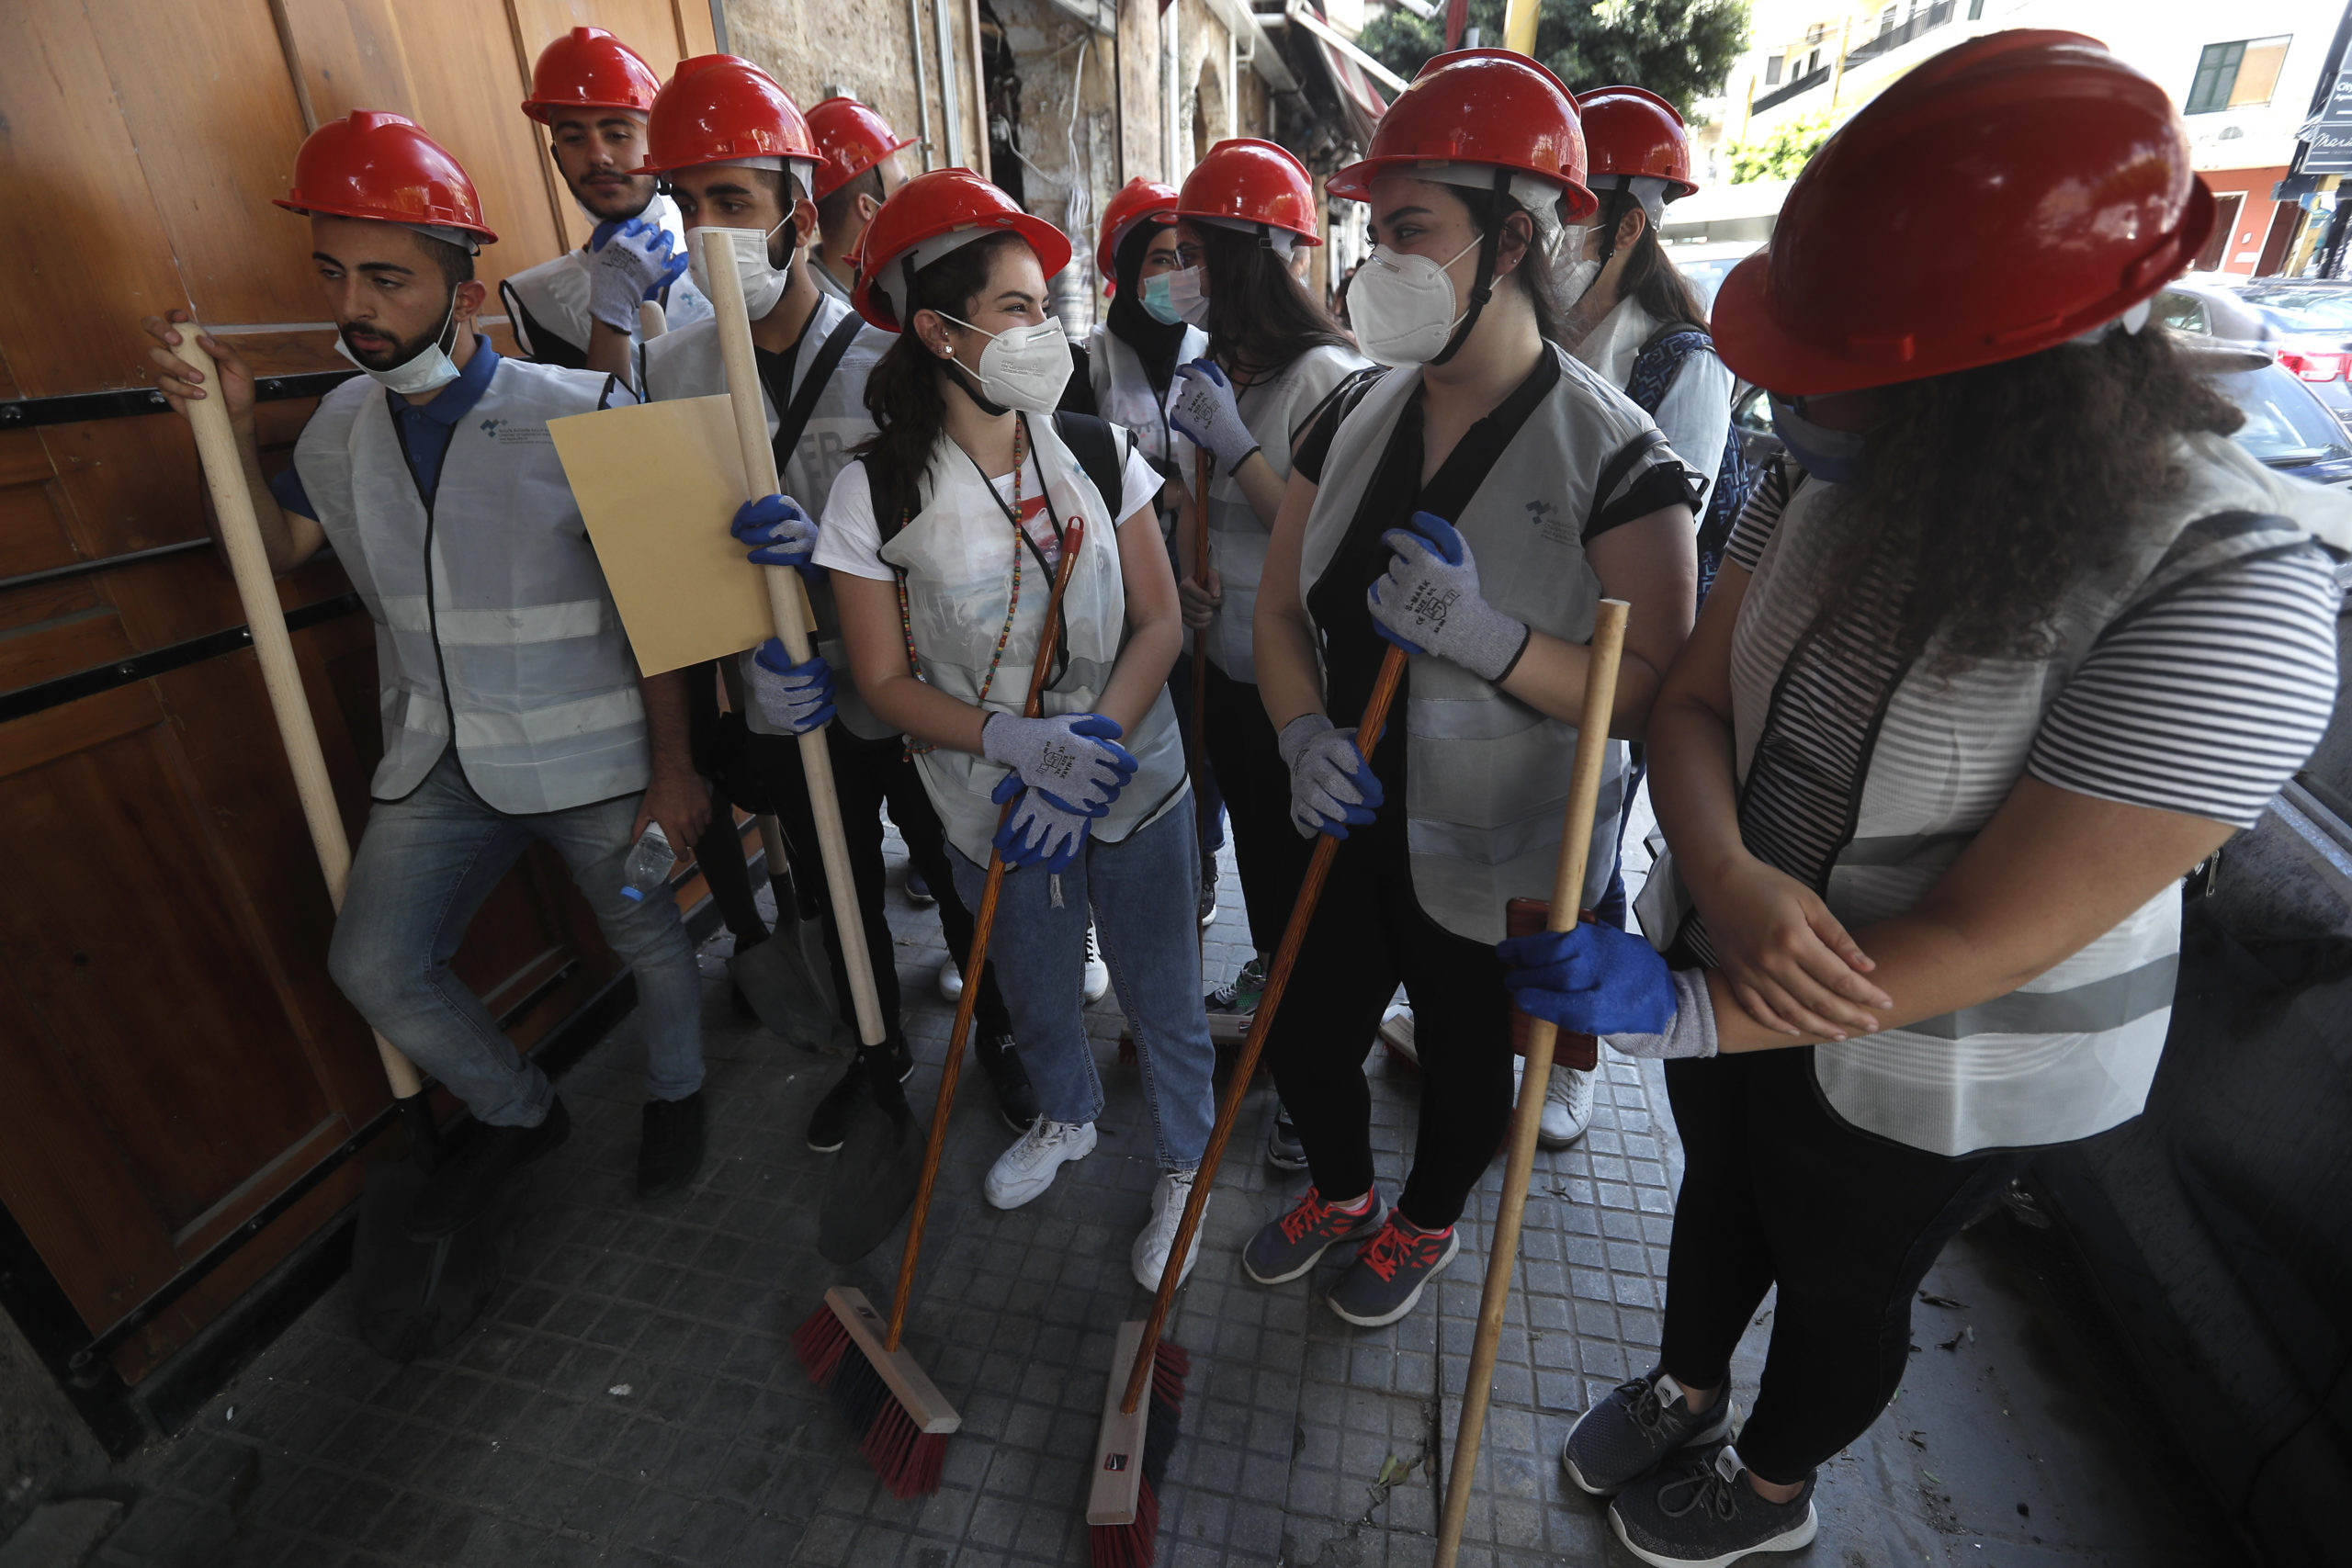 People who volunteered to help clean damaged homes and give other assistance, gather on a street that was damaged by last week's explosion, in Beirut, Lebanon, Tuesday, Aug. 11, 2020. The explosion that tore through Beirut left around a quarter of a million people with homes unfit to live in. In the absence of the state, residents of Beirut opened their homes to relatives, friends and neighbors. And on the streets, it was young volunteers with brooms and shovels, not government workers, who cleared the littered streets. (AP Photo/Hussein Malla)